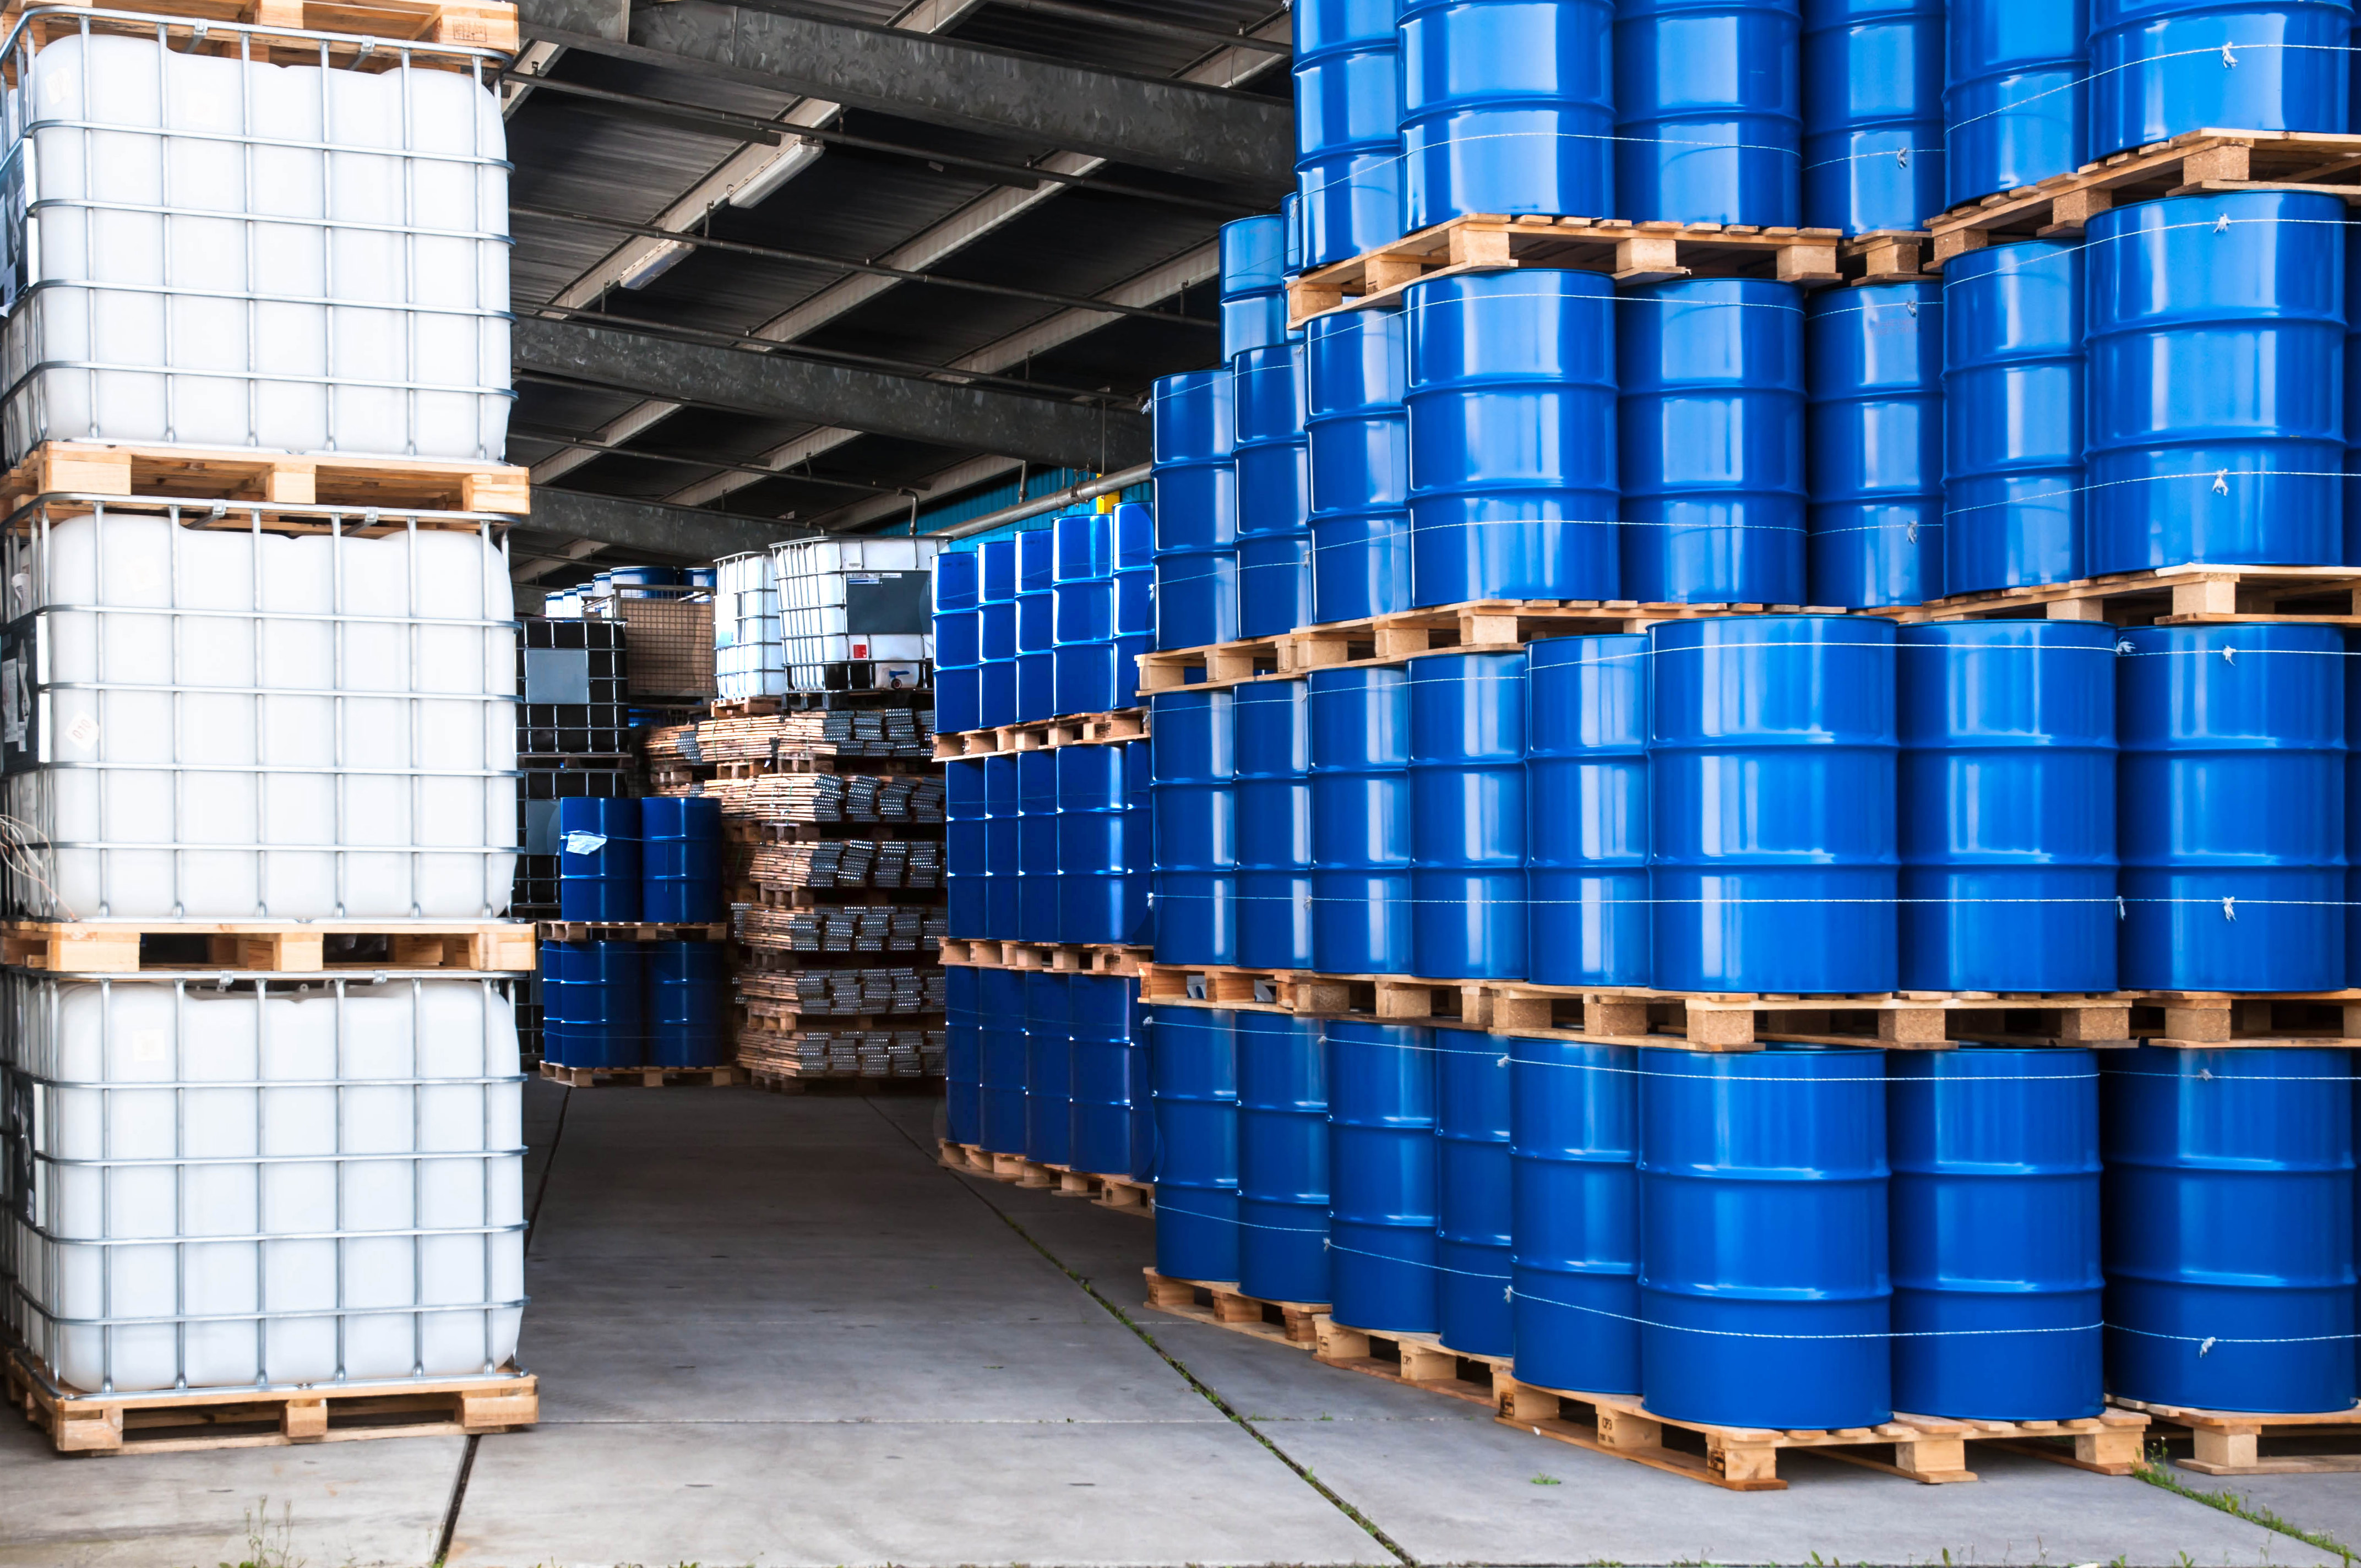 Chemical process engineers and supply chain leaders seeking a chemical packaging, labeling and storage provider can use chemvm to find a chemical service provider in minutes